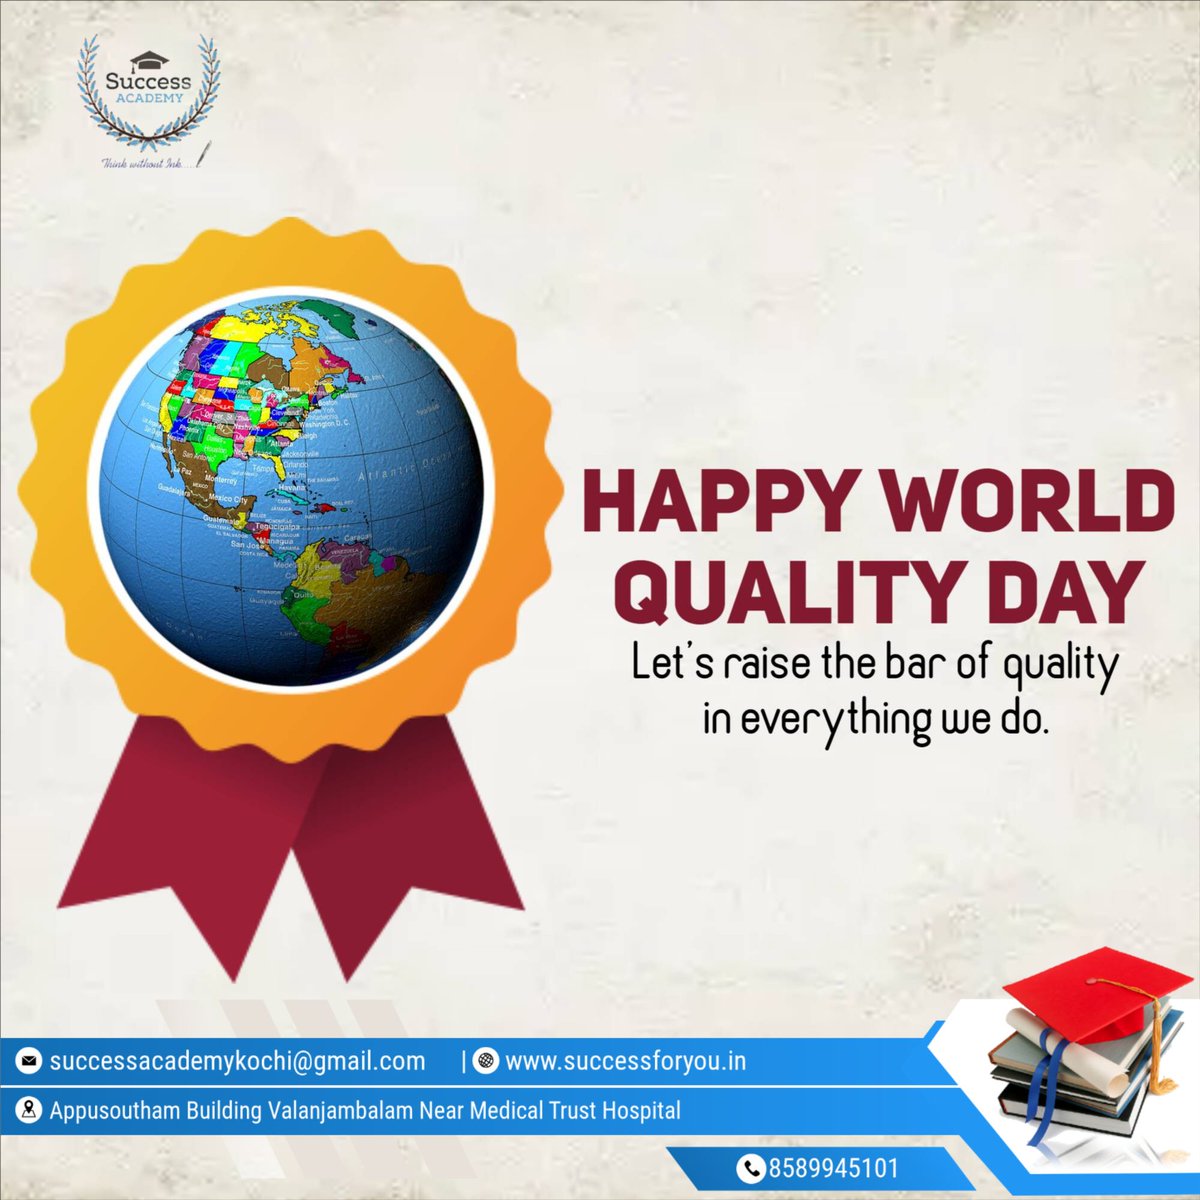 #WorldQualityDay #QualityMatters #QualityManagement #QualityImprovement
#TotalQualityManagement #QualityCulture #QualityInAction #ExcellenceInQuality
#QualityControl #CustomerSatisfaction #ContinuousImprovement #SSCCoaching #BankCoaching #SuccessAcademyKochi